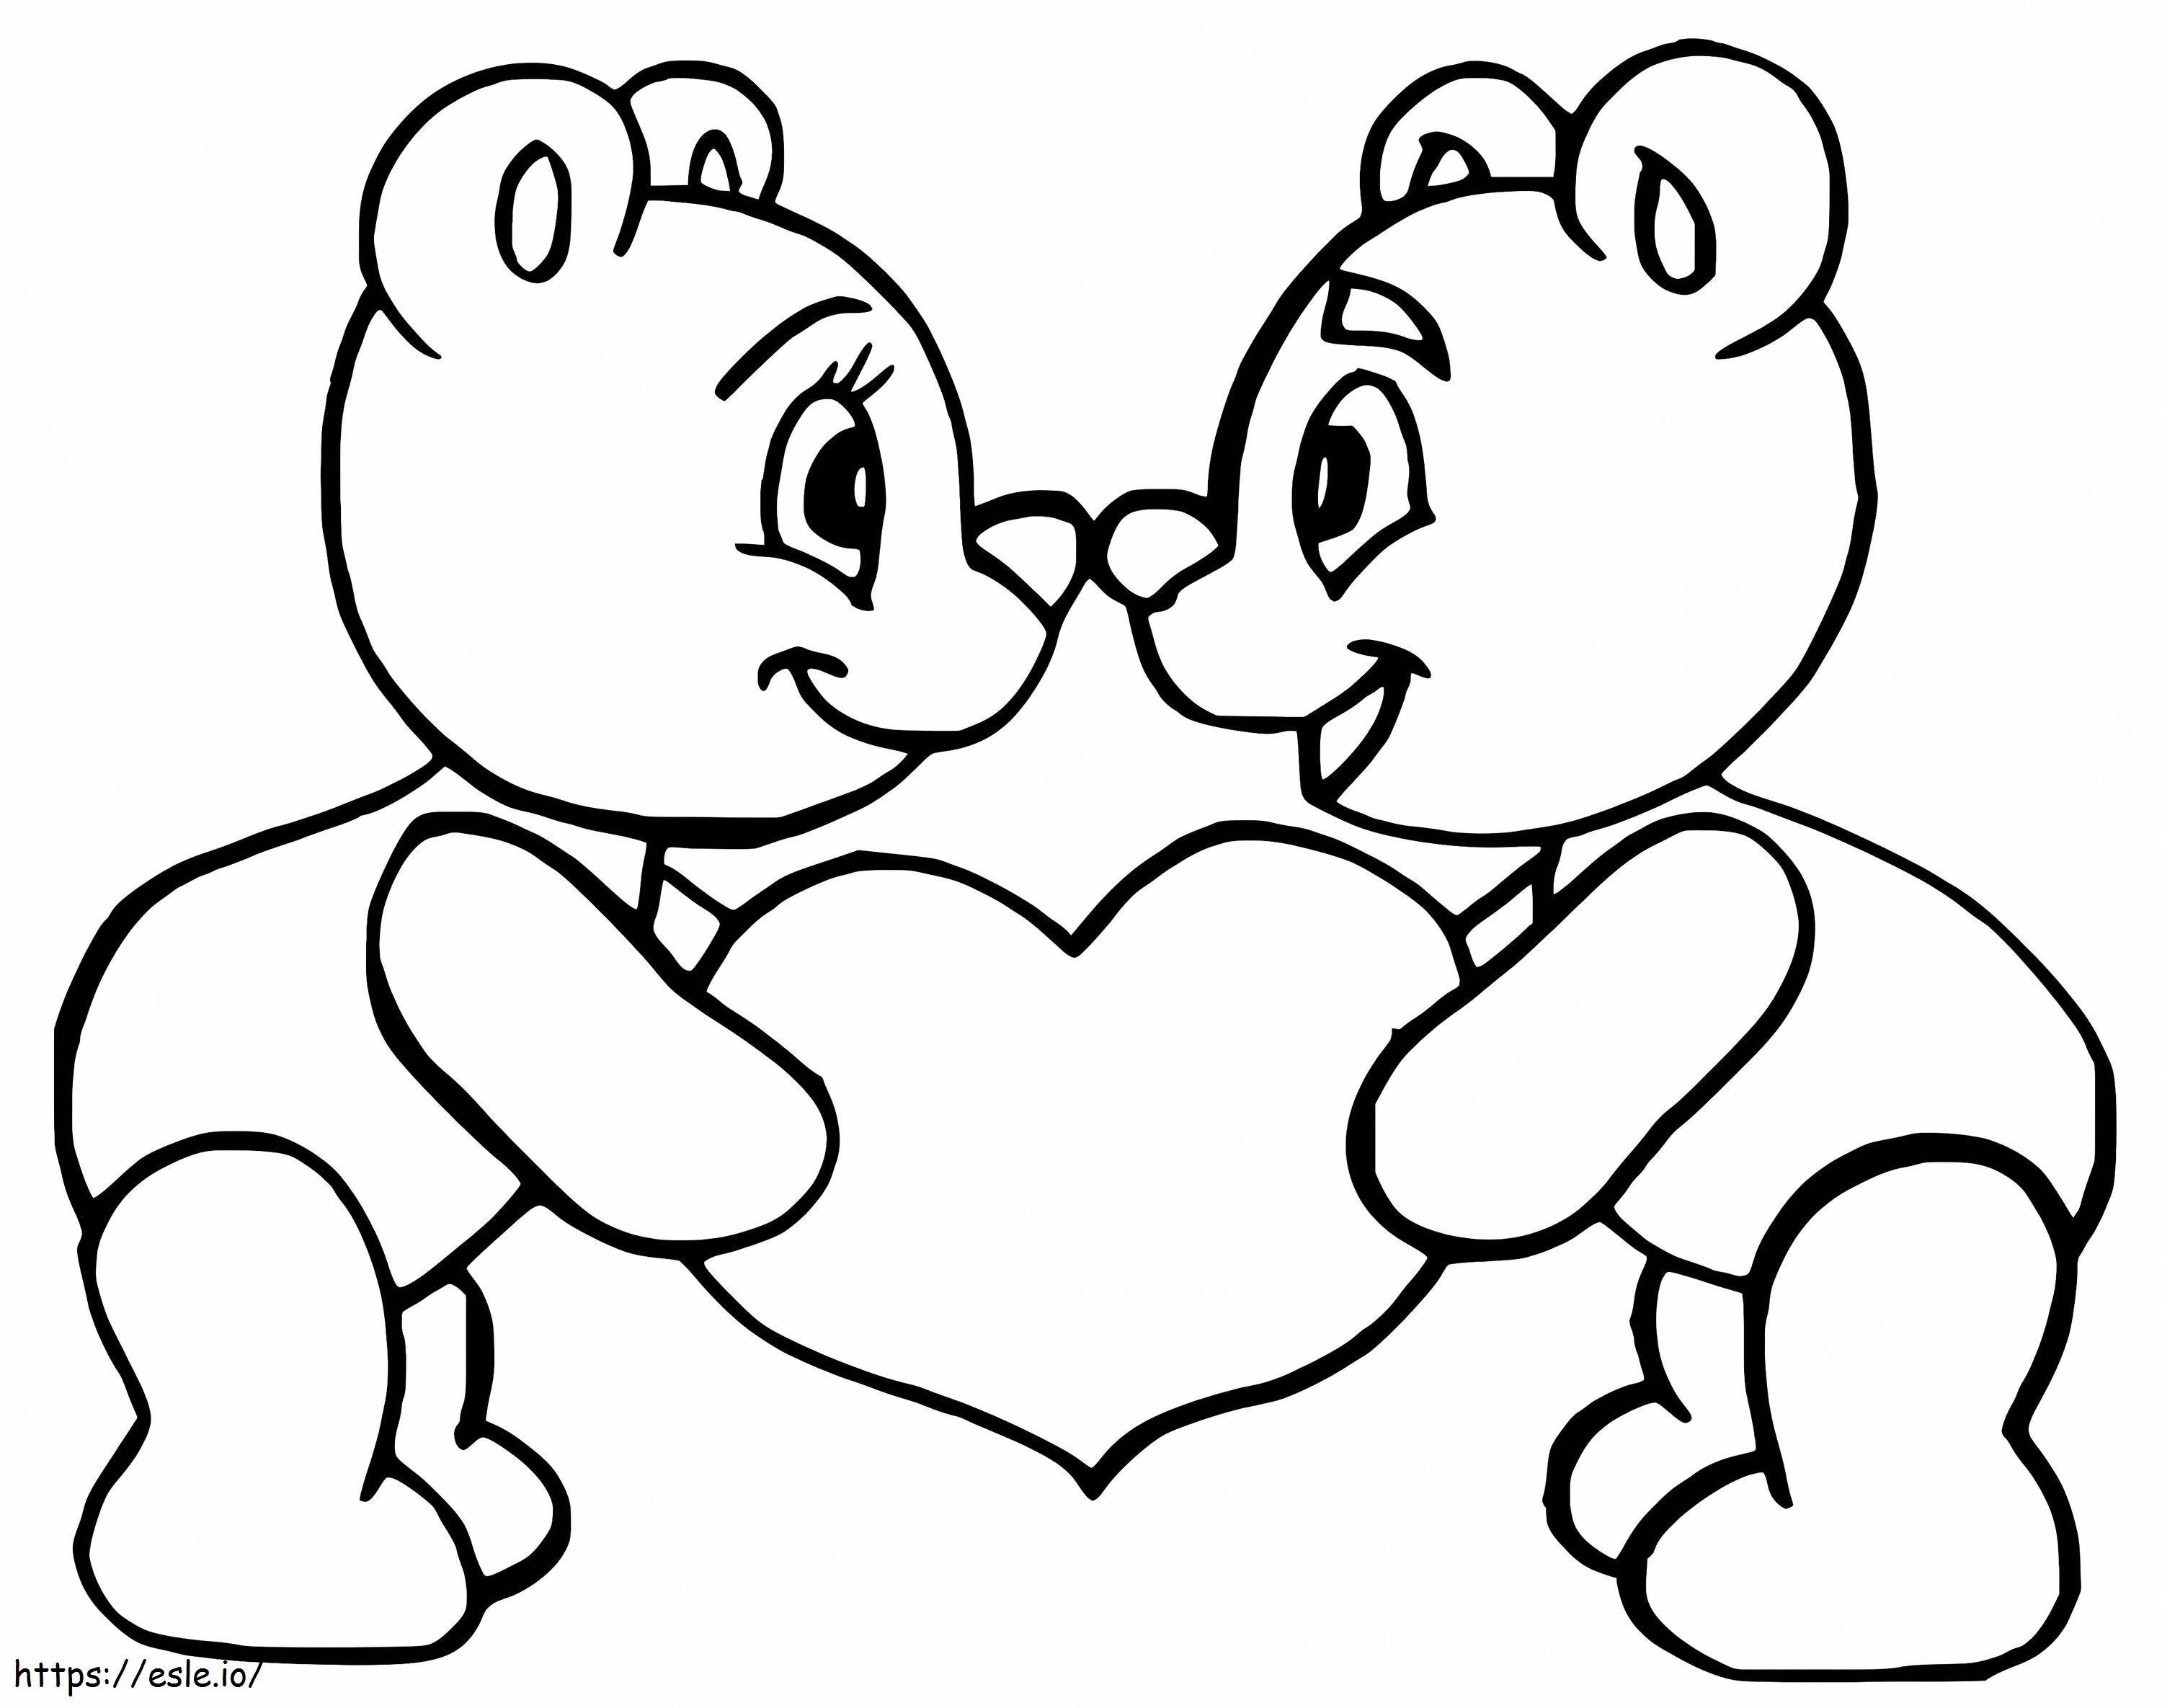 Bear Couple coloring page